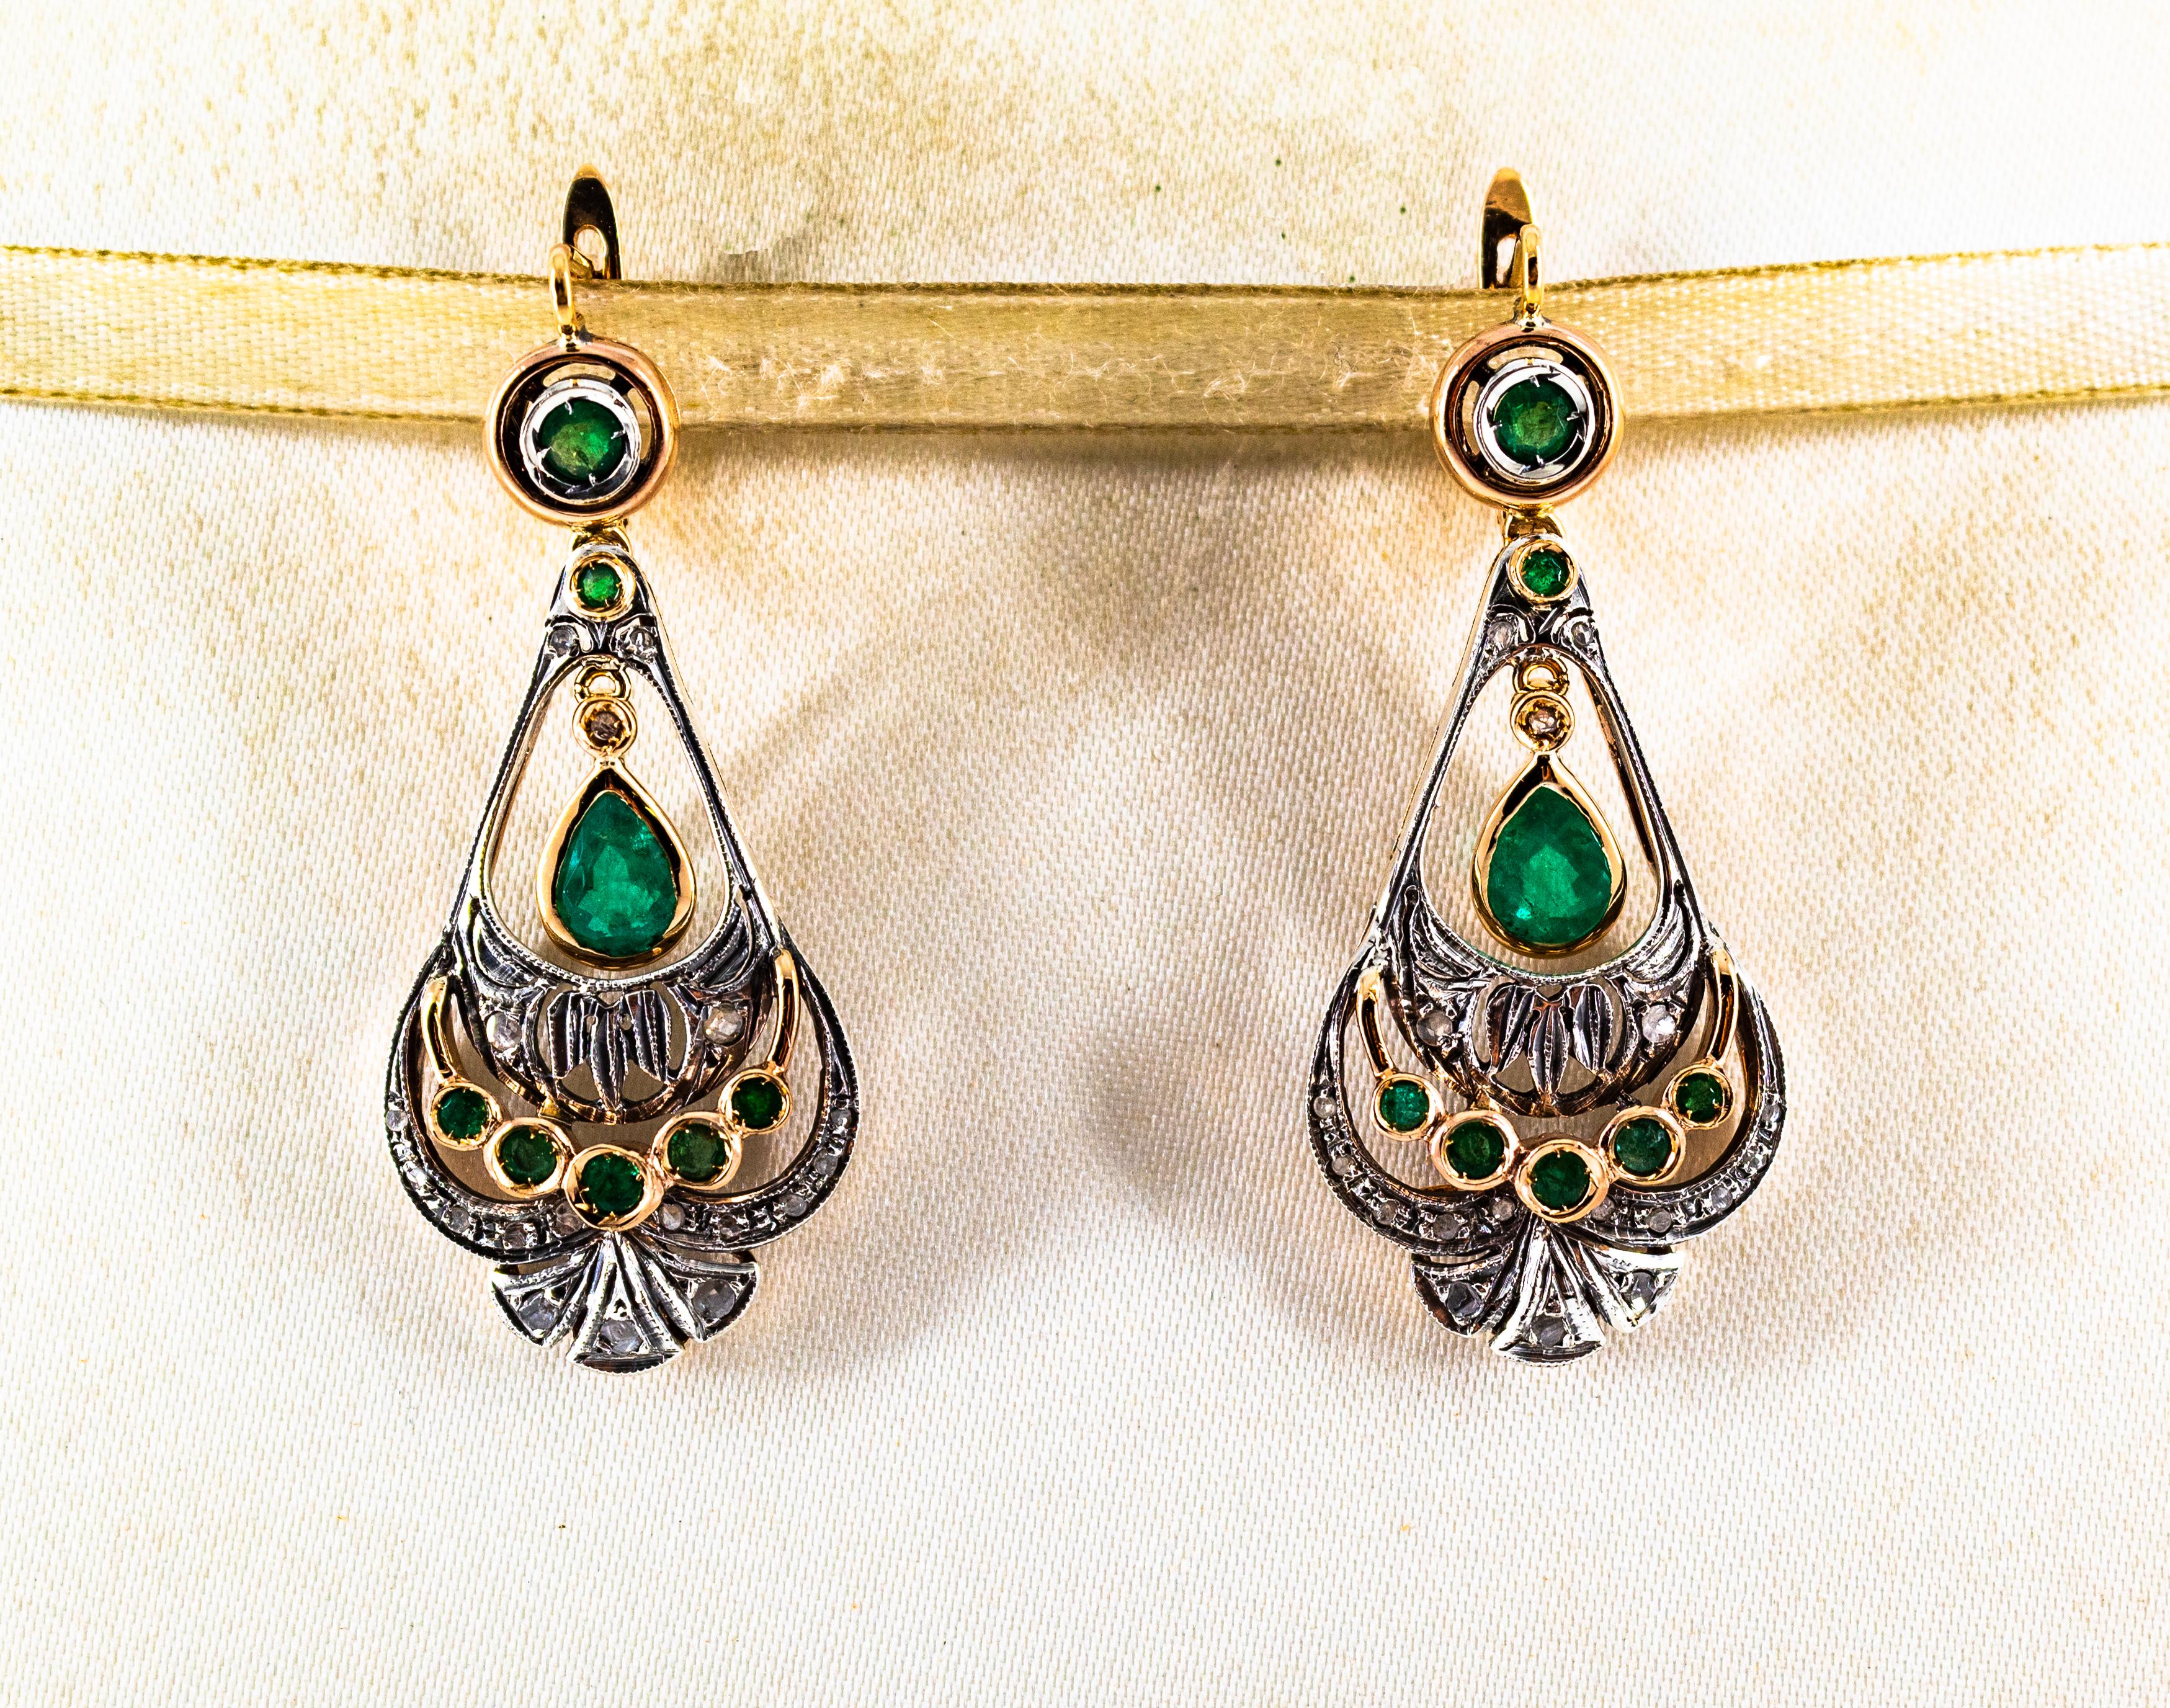 These Earrings are made of 9K Yellow Gold and Sterling Silver.
These Earrings have 0.30 Carats of White Rose Cut Diamonds.
These Earrings have 2.40 Carats of Emeralds.

All our Earrings have pins for pierced ears but we can change the closure and